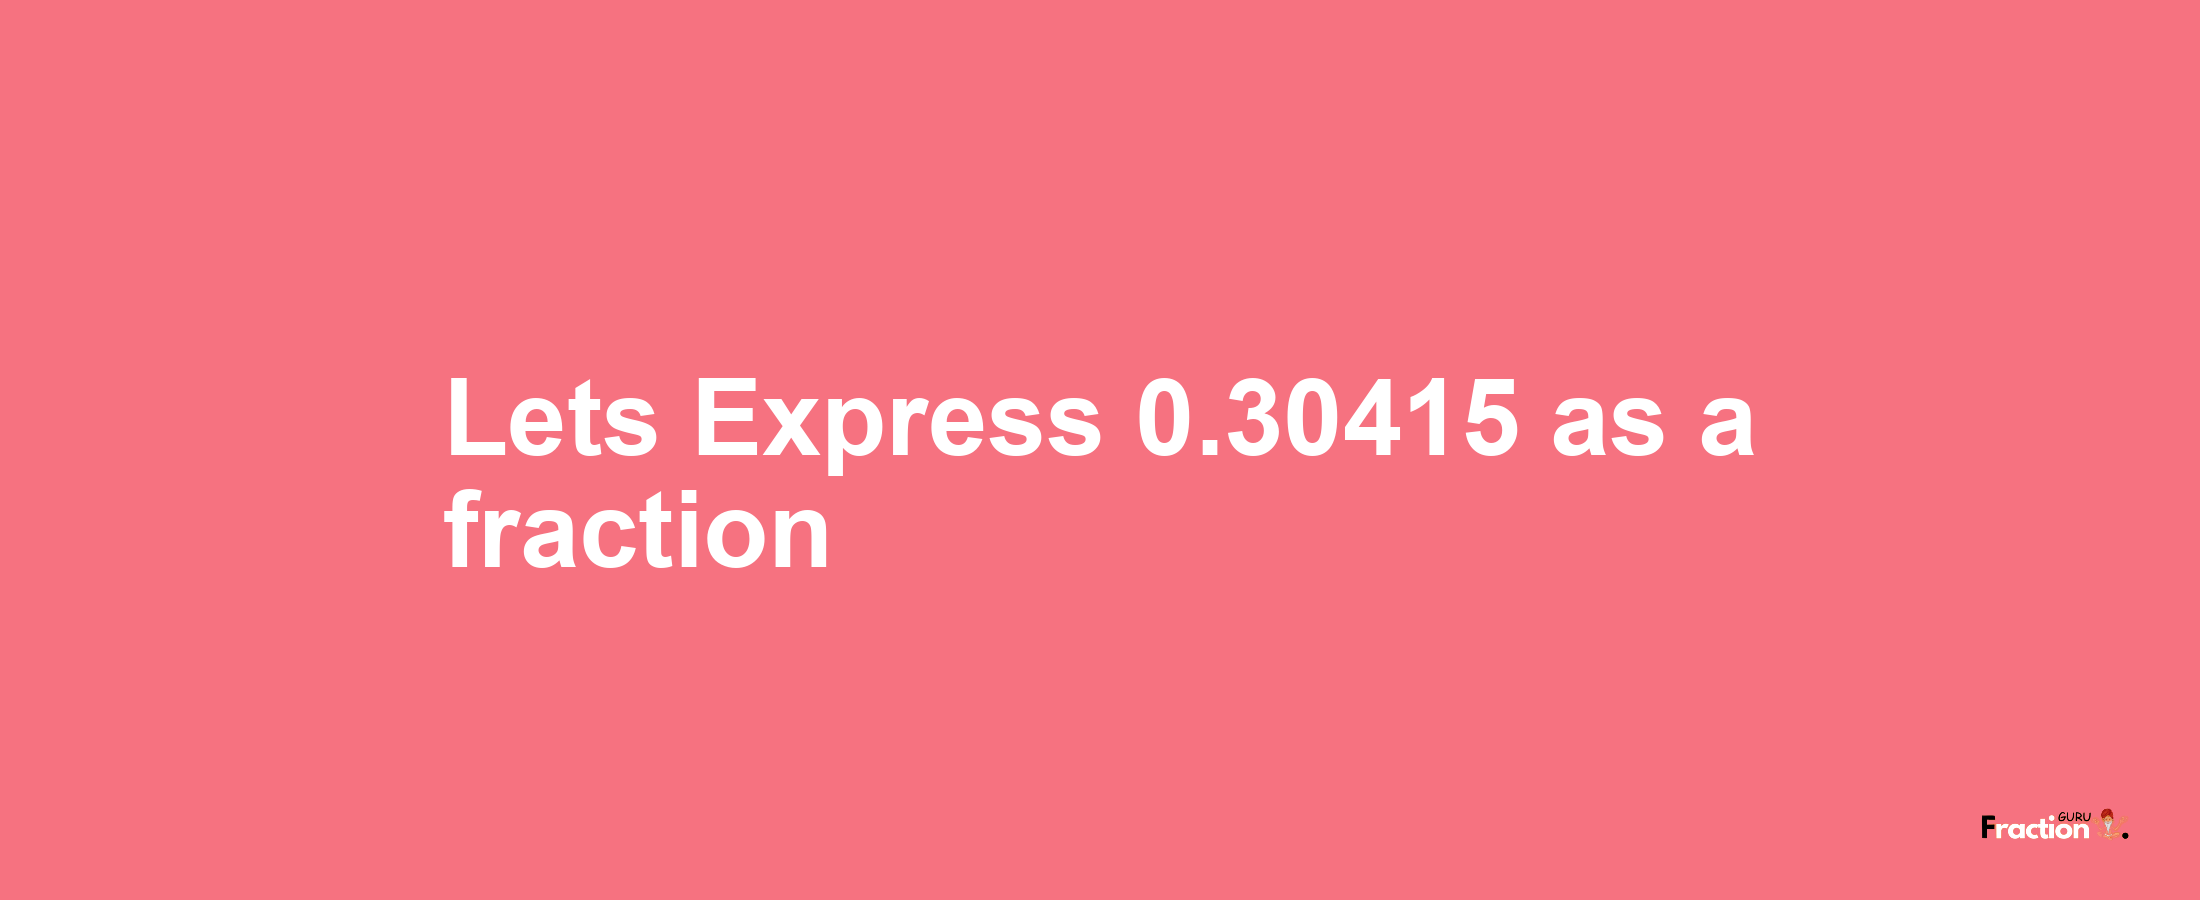 Lets Express 0.30415 as afraction